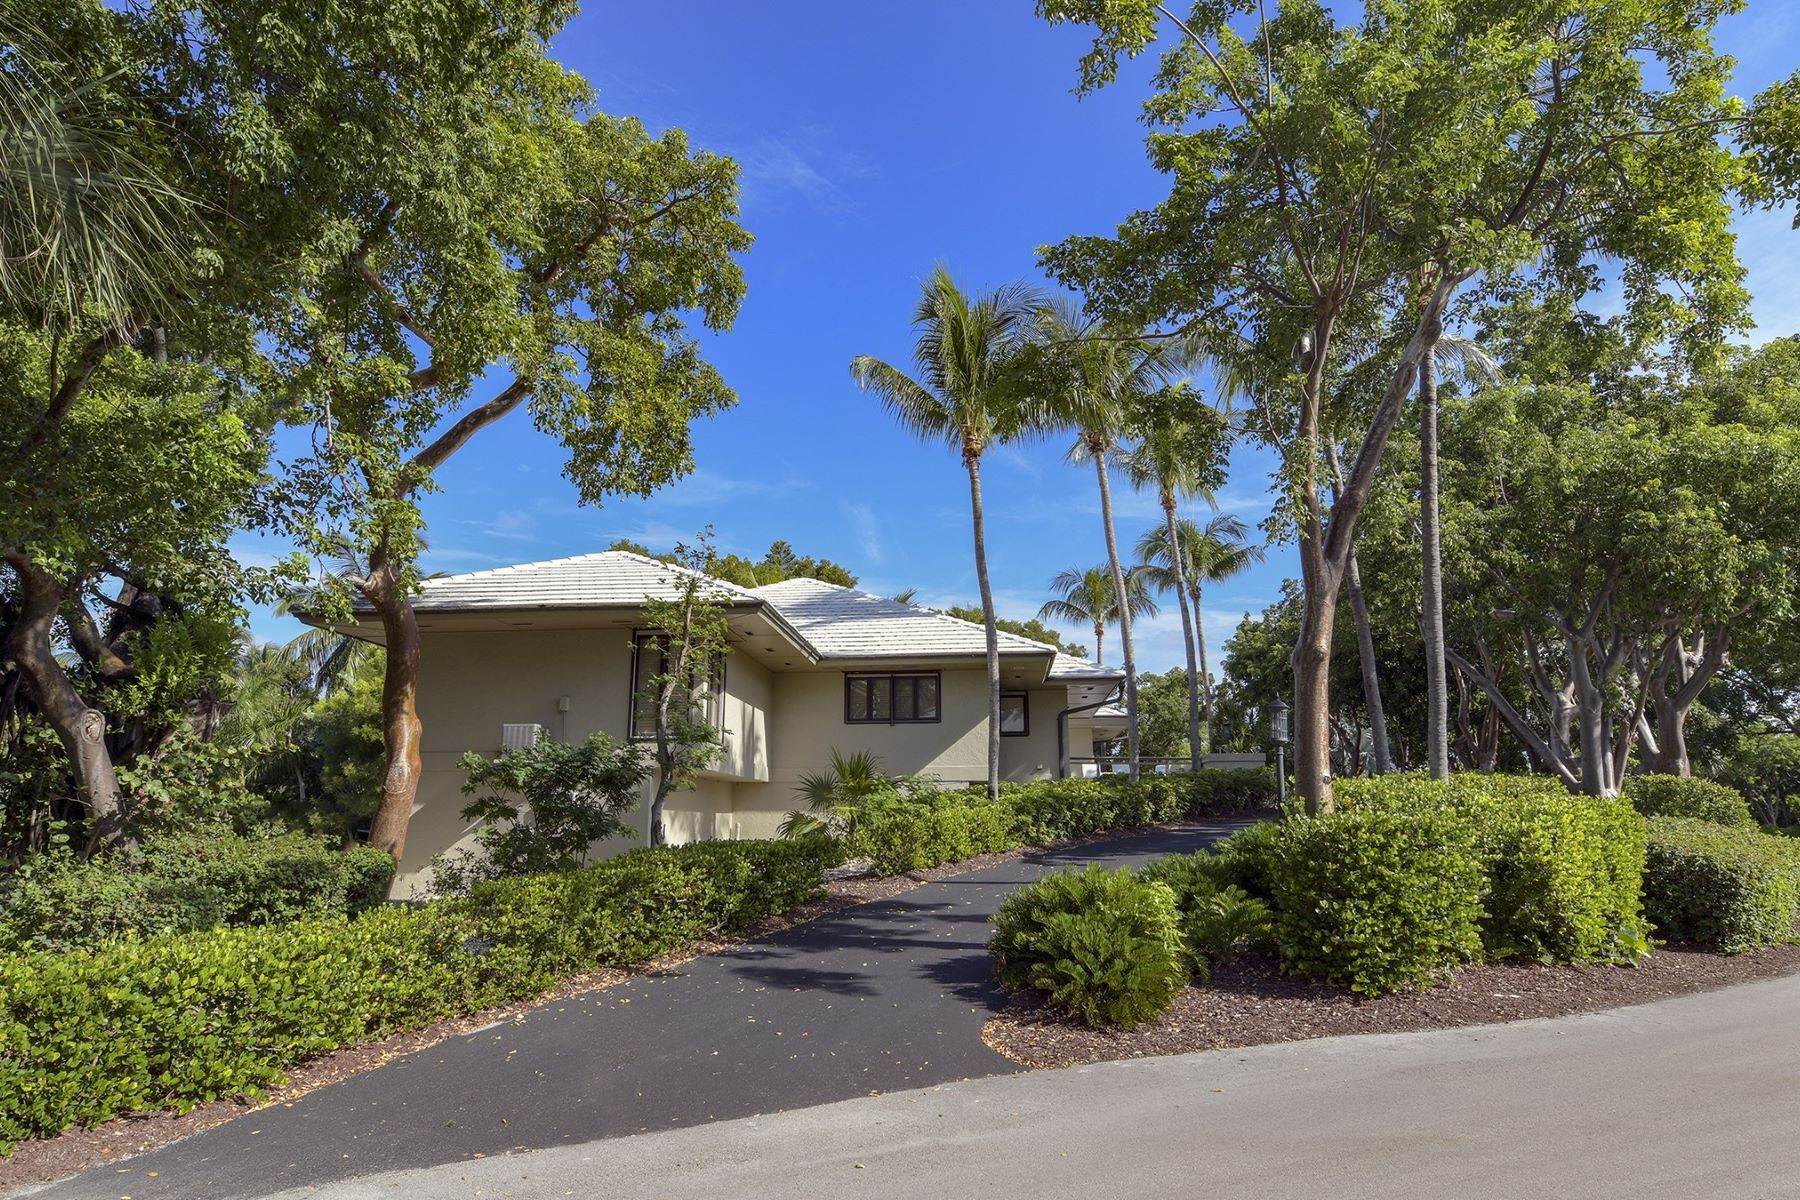 48. Property for Sale at Pumpkin Key 10 Cannon Point Key Largo, Florida 33037 United States